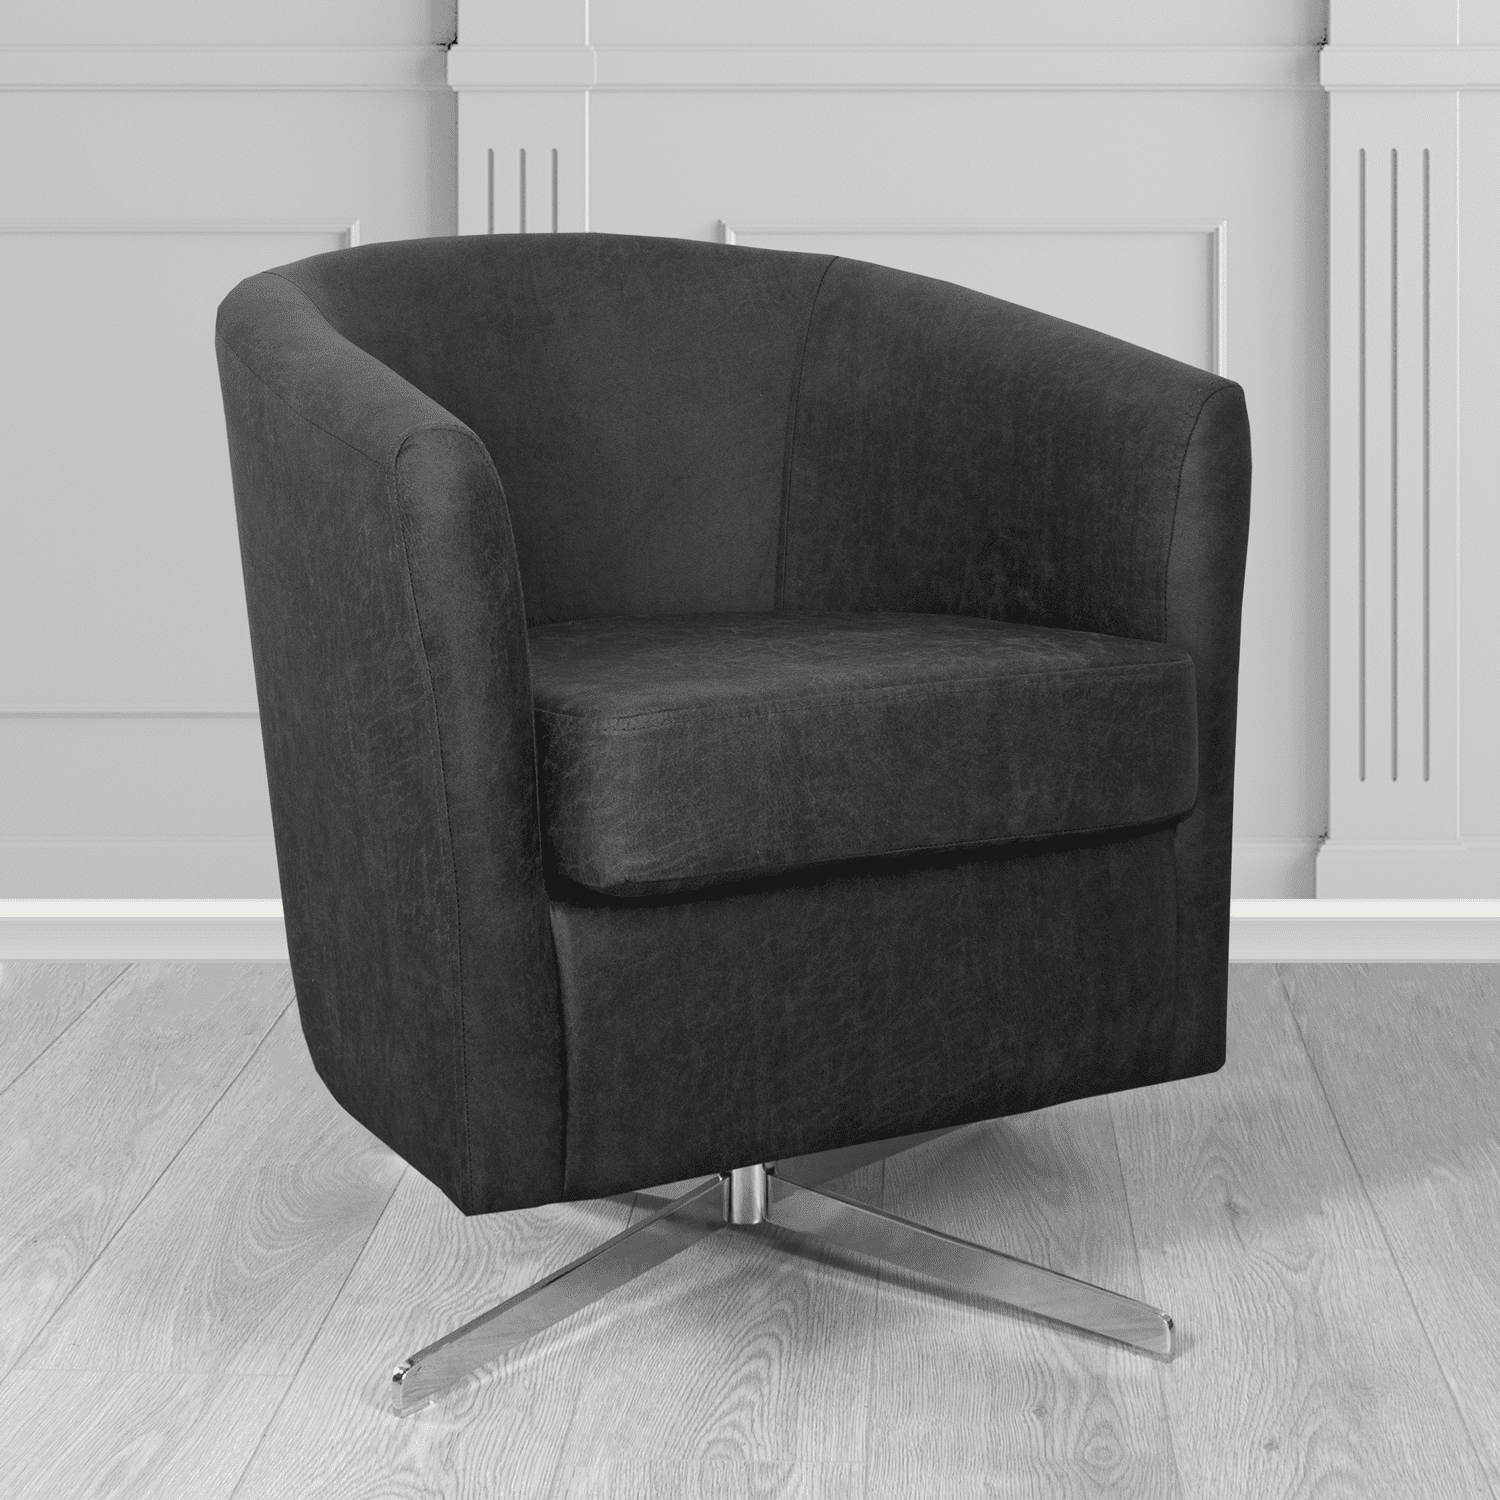 Cannes Swivel Tub Chair in Nevada Black Faux Leather - The Tub Chair Shop